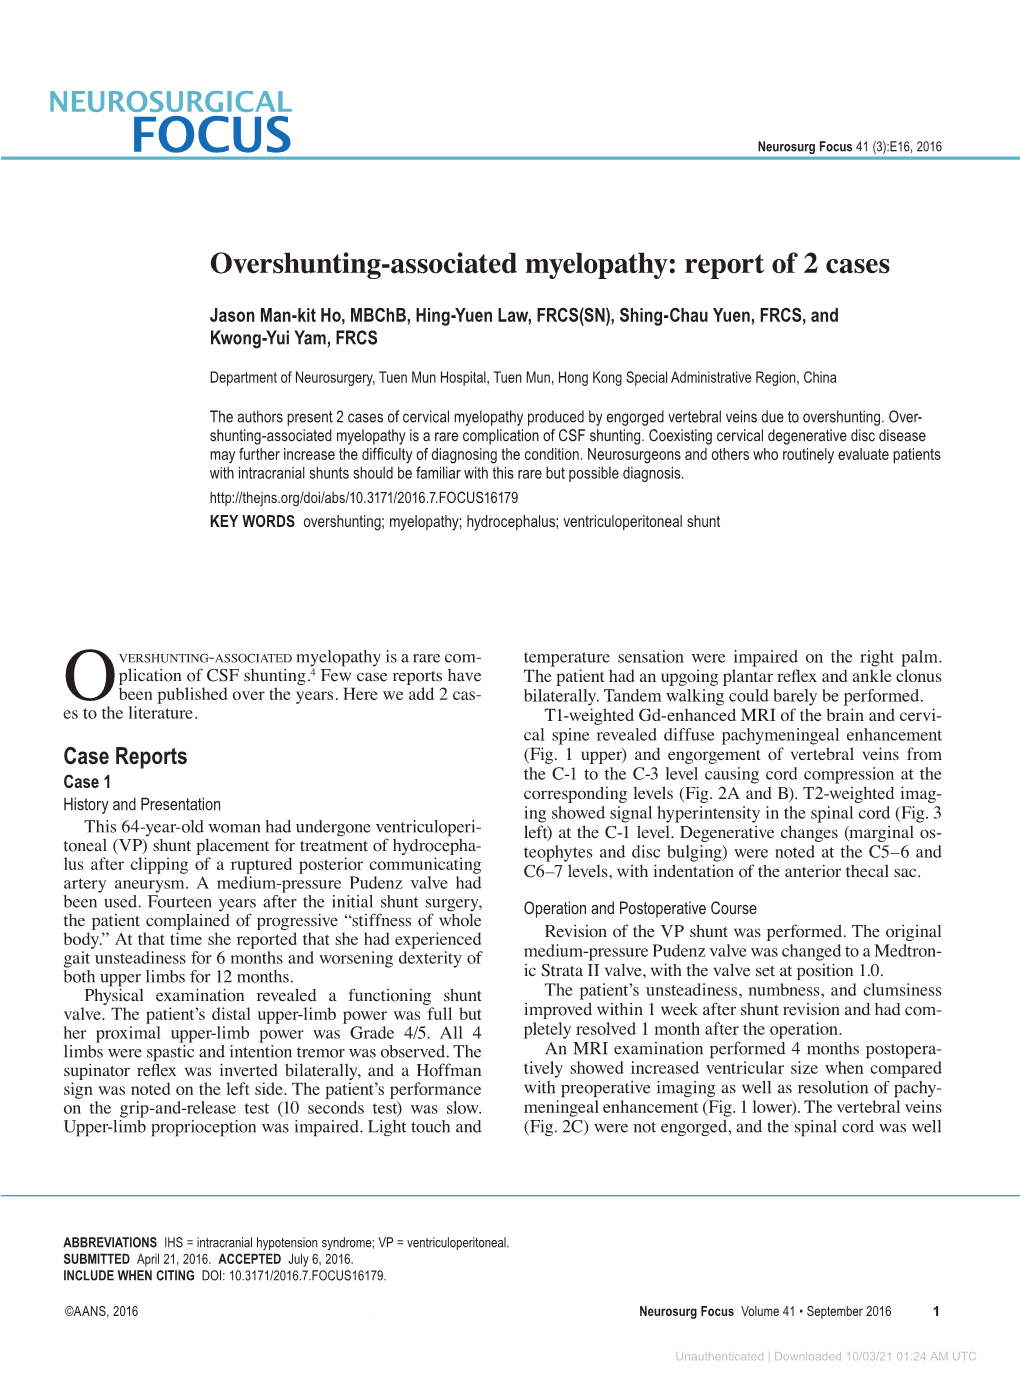 Overshunting-Associated Myelopathy: Report of 2 Cases